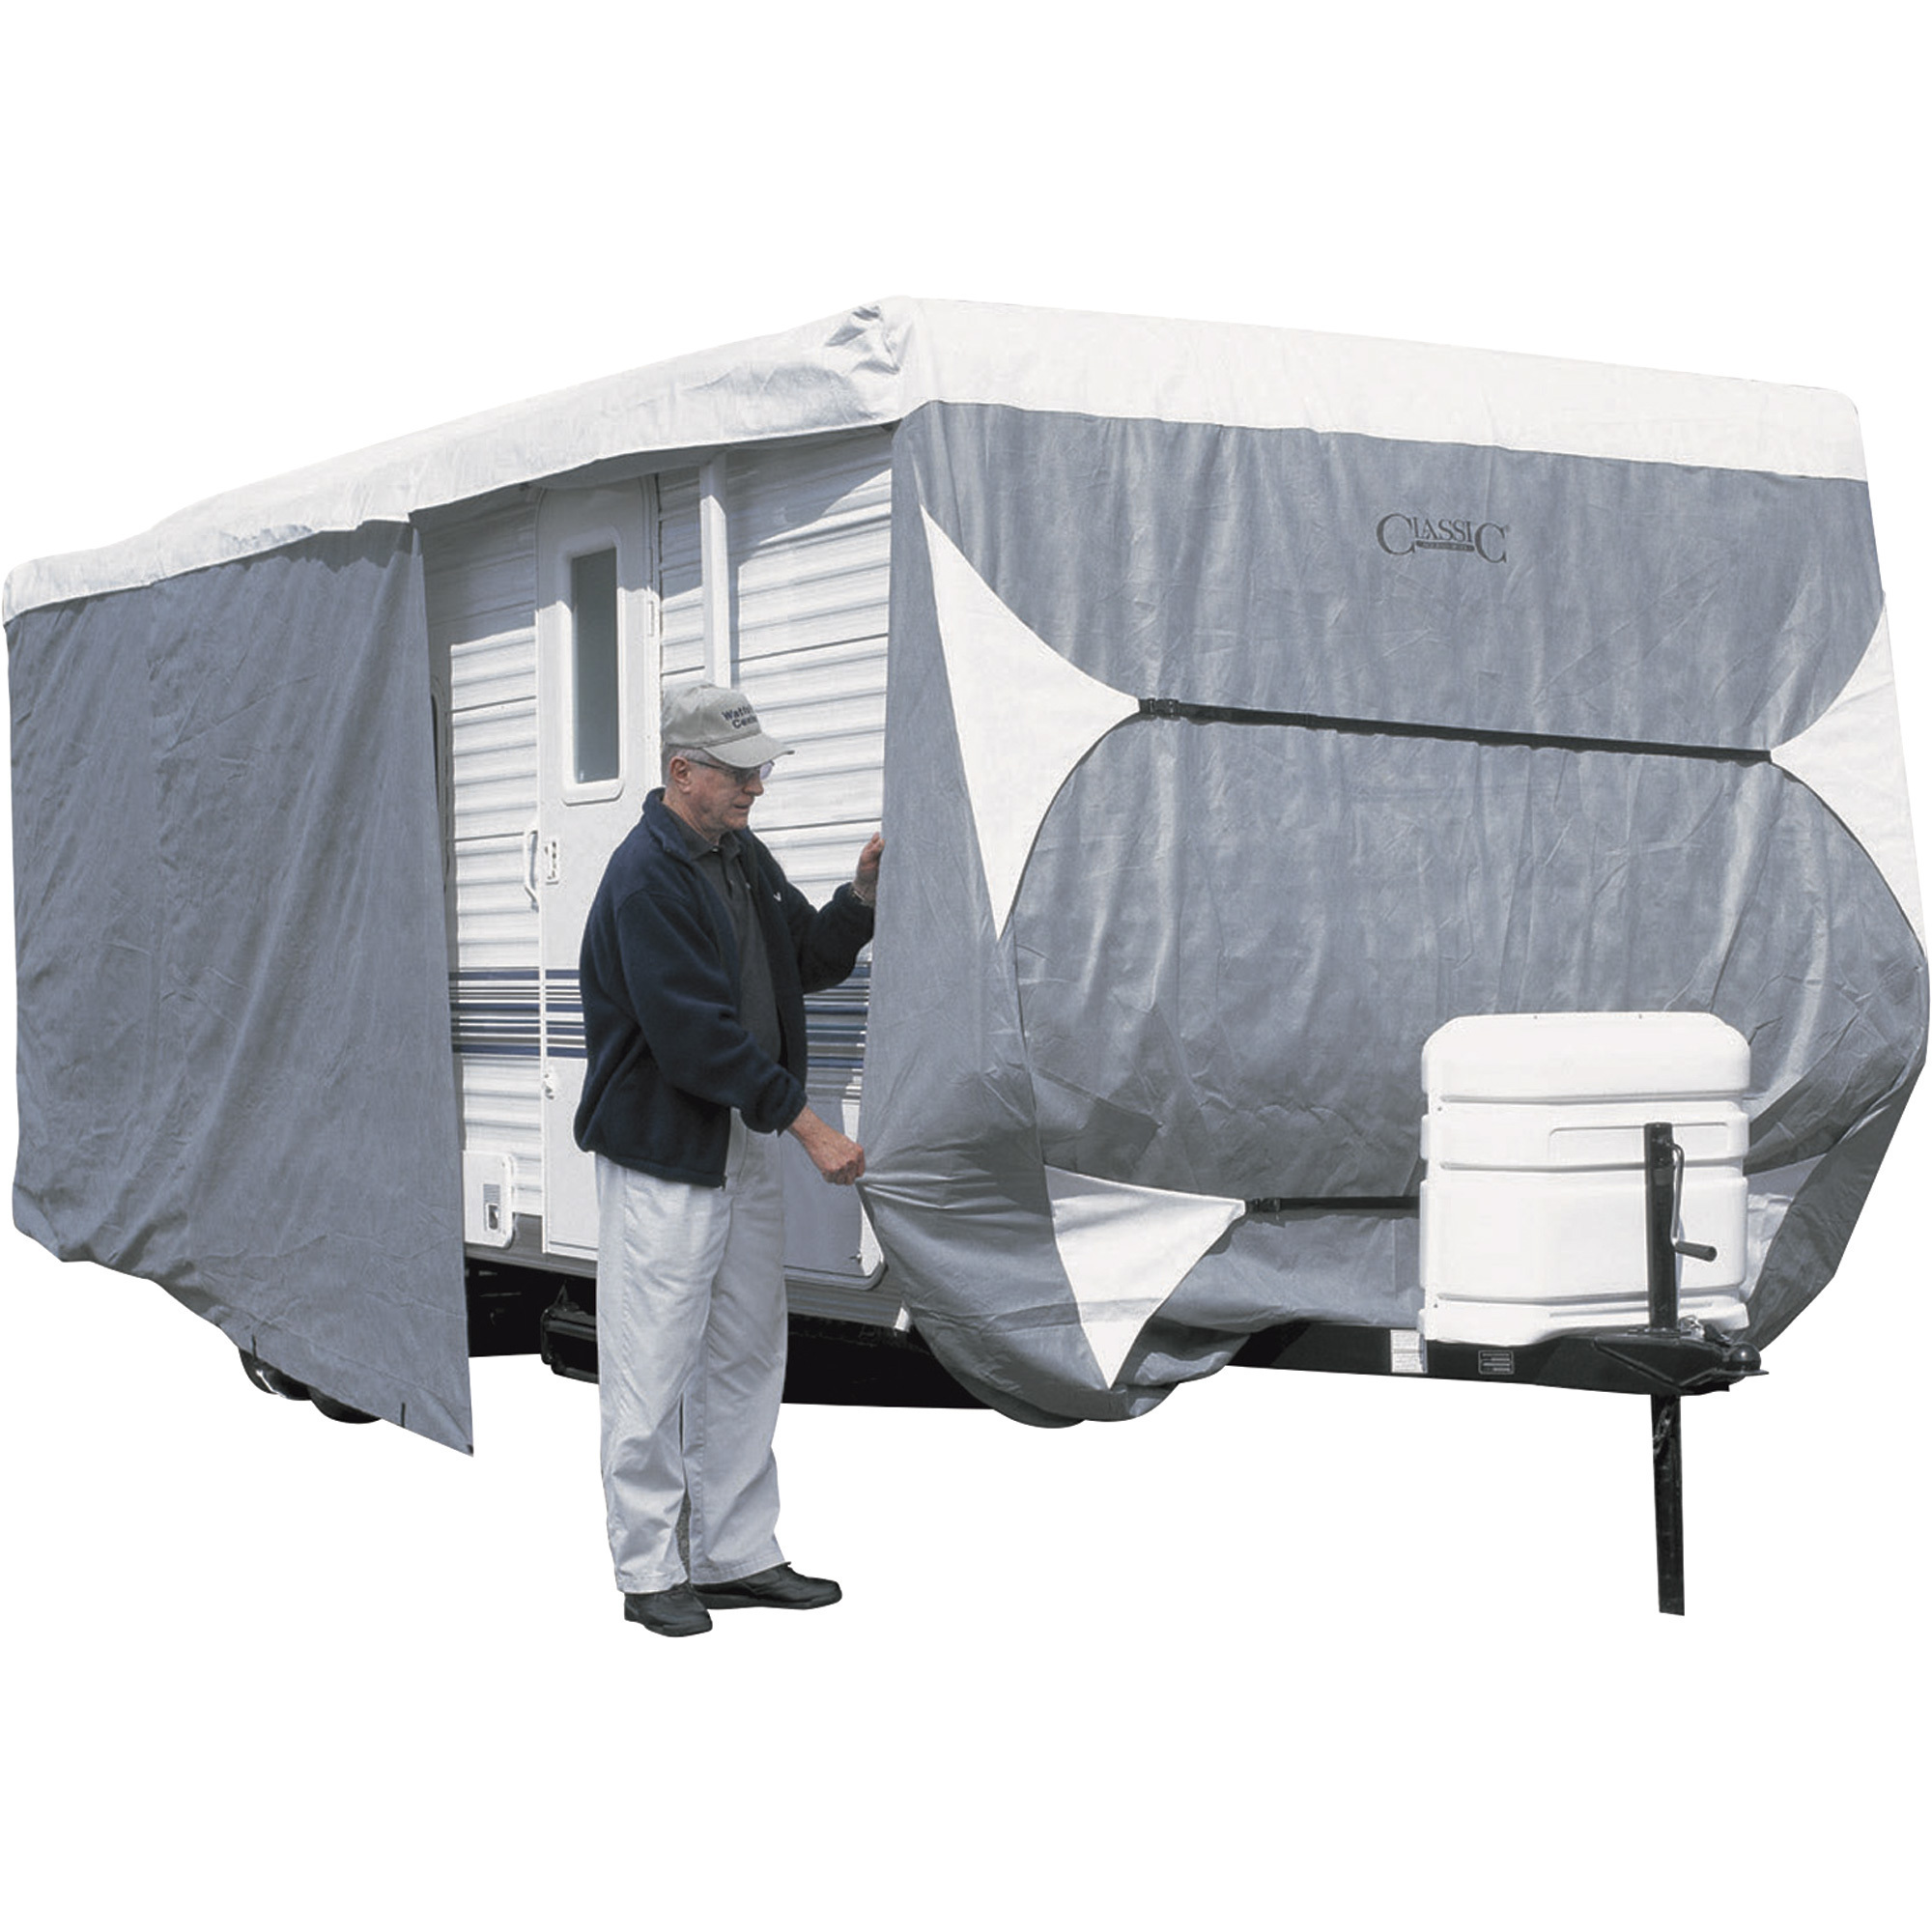 Classic Accessories OverDrive PolyPro 3 Deluxe Travel Trailer Cover, Model 6, Gray and White, Fits 30ft.L-33ft.L x 118Inch H RVs, Model 73663